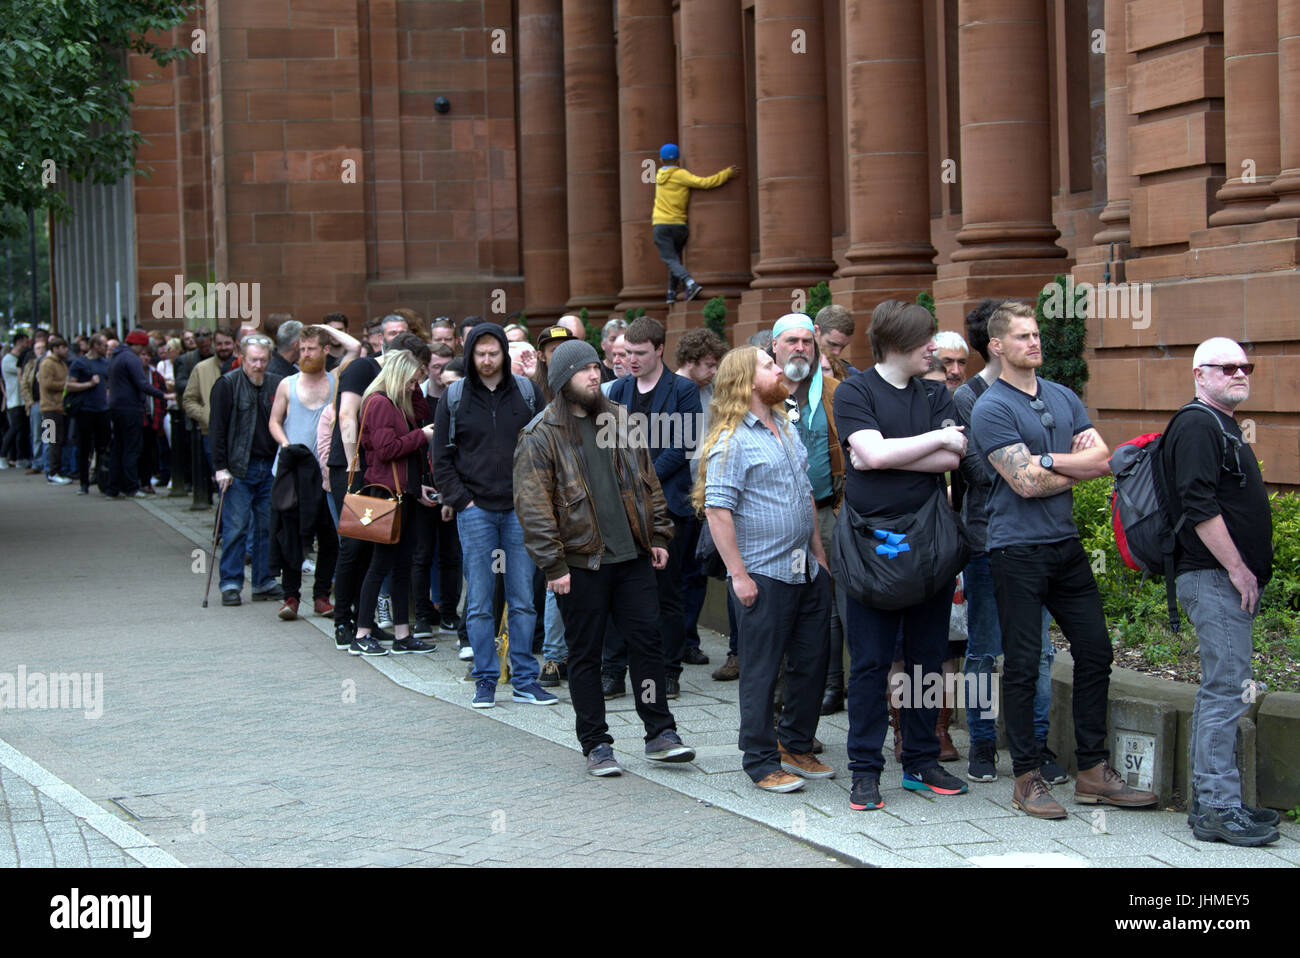 Glasgow, Scotland, UK. 14th July. Long queues in Glasgow for a film as casting for extras rakes place at the city's Kelvin Hall. The movie based on Robert the Bruce gave preference for beards though both men and women were required. The length of the queie caused a stir locally and one musician decided to come back tomorrow on his bike for the second day of casting hoping it had gone down by then. Credit Gerard Ferry/Alamy news Stock Photo